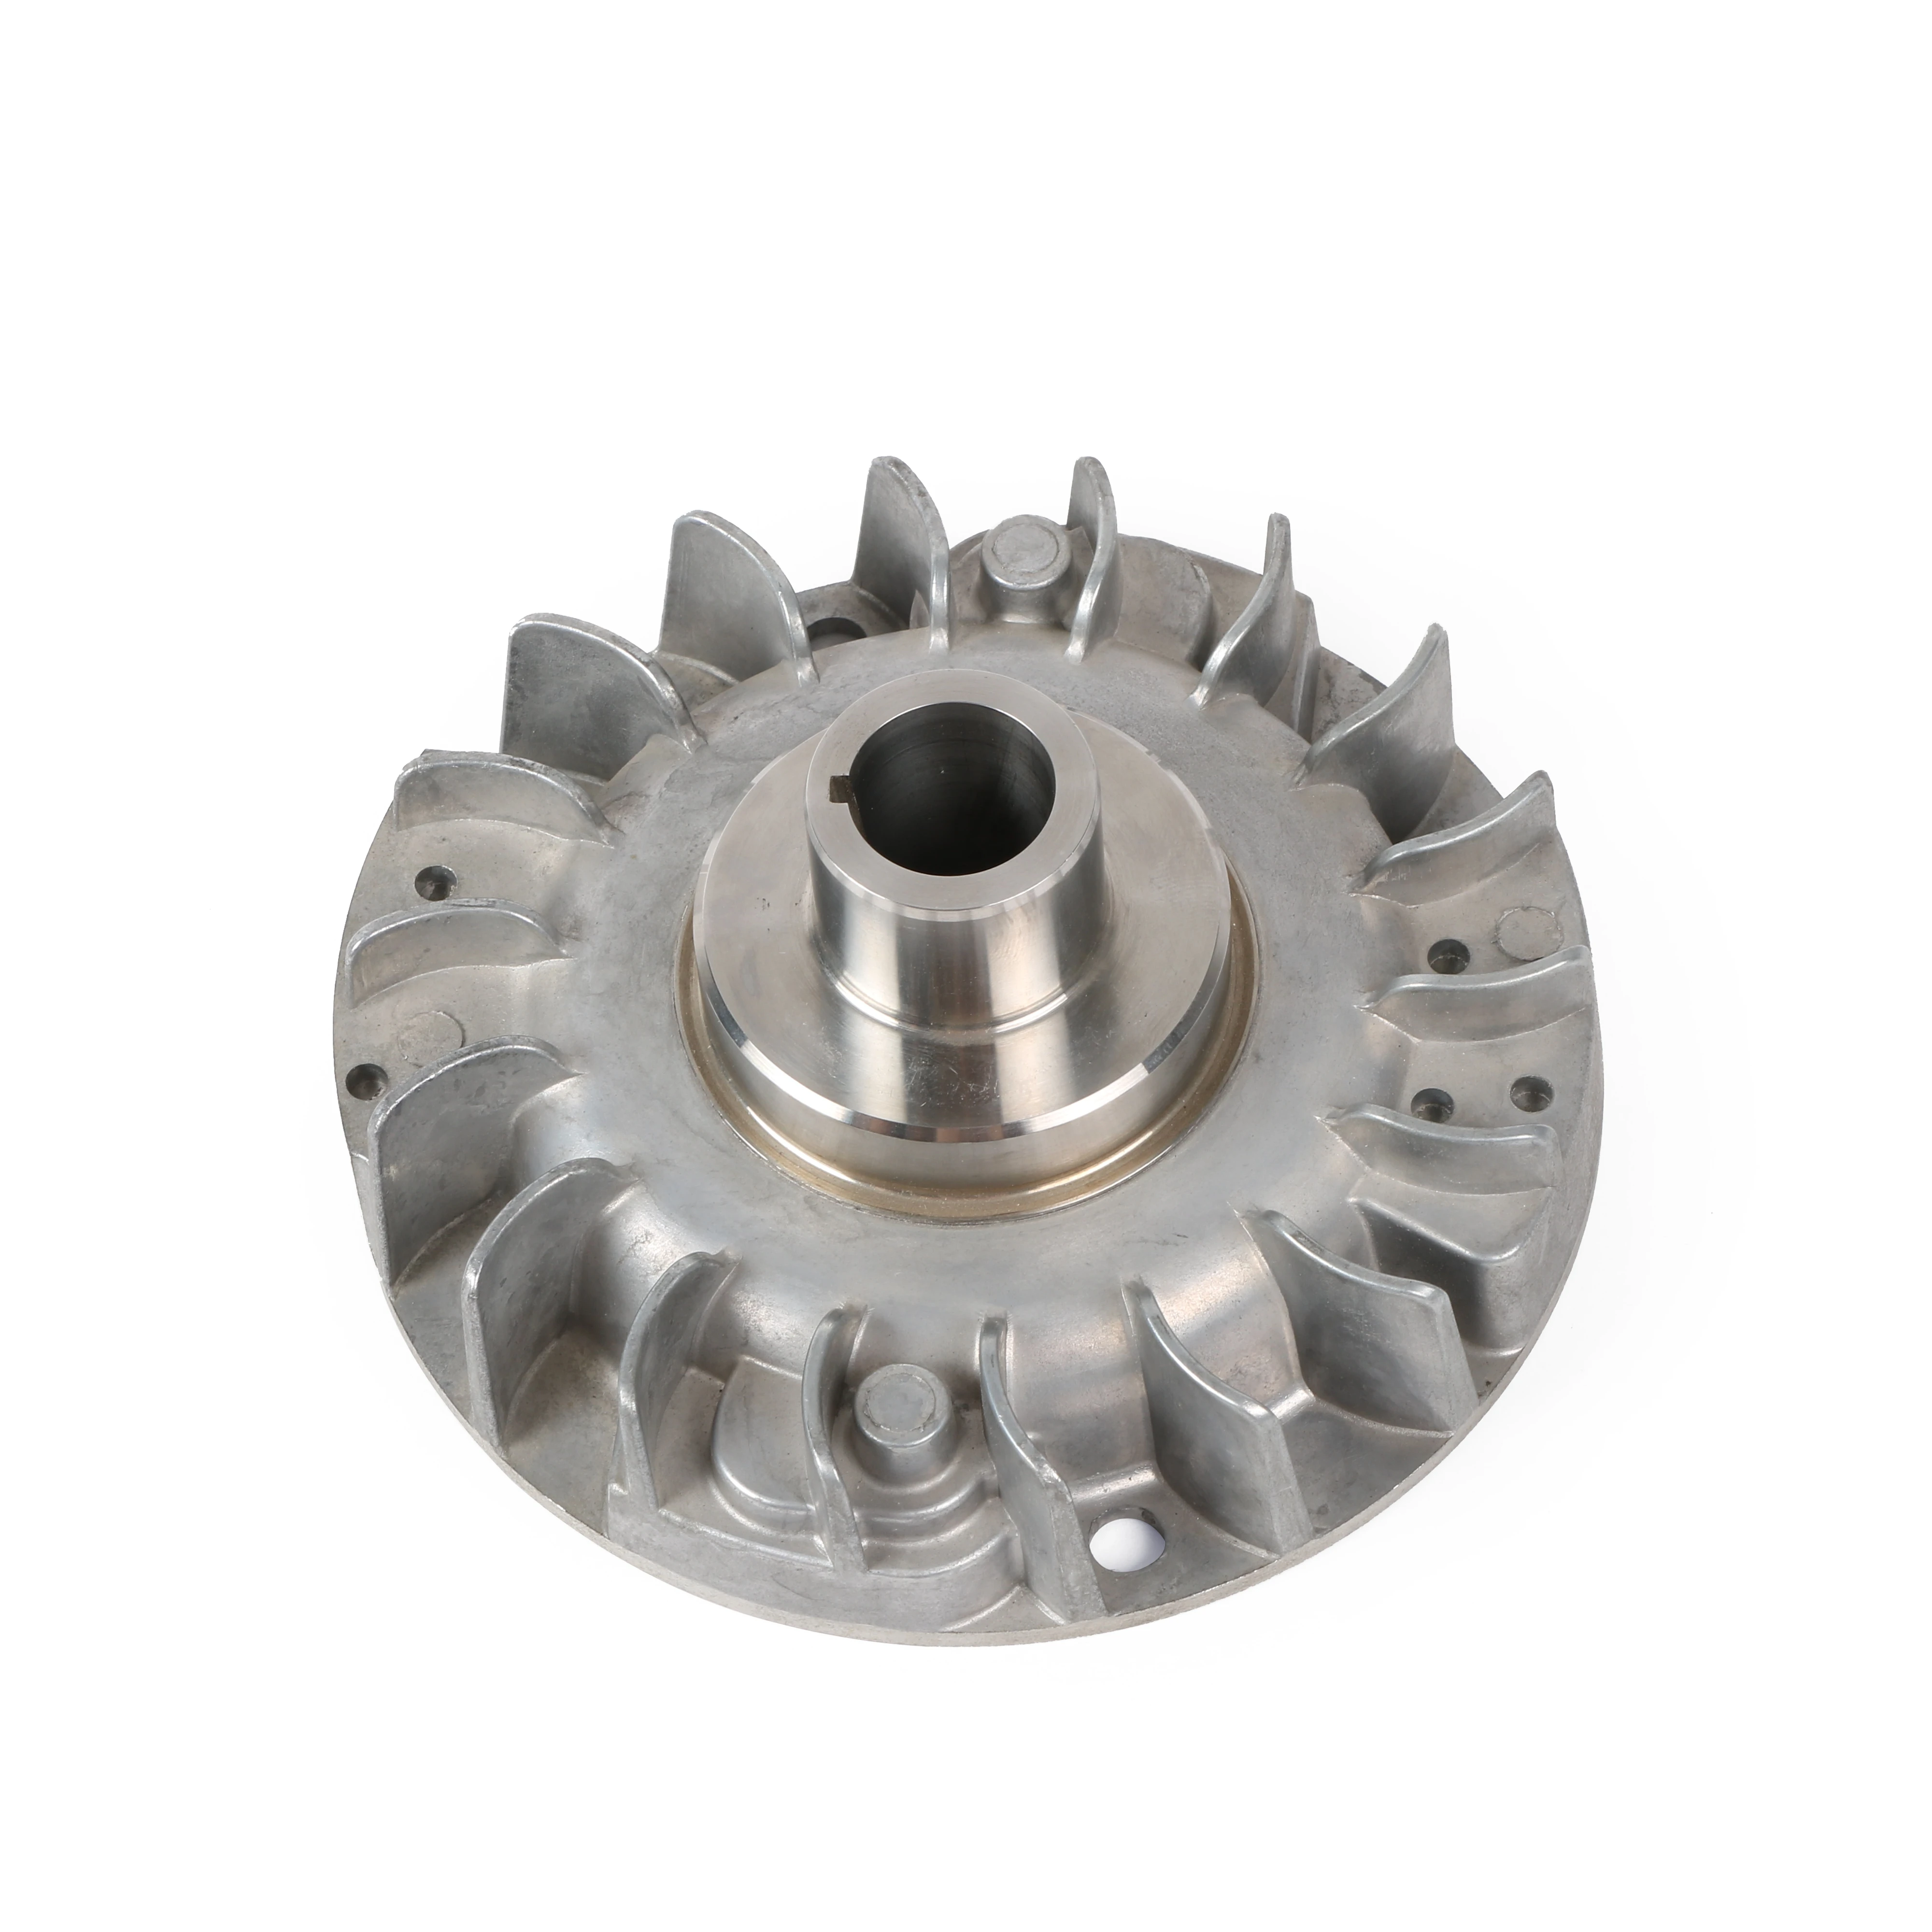 China made high precise motorcycle assembly products ADC12 aluminum alloy die casting body